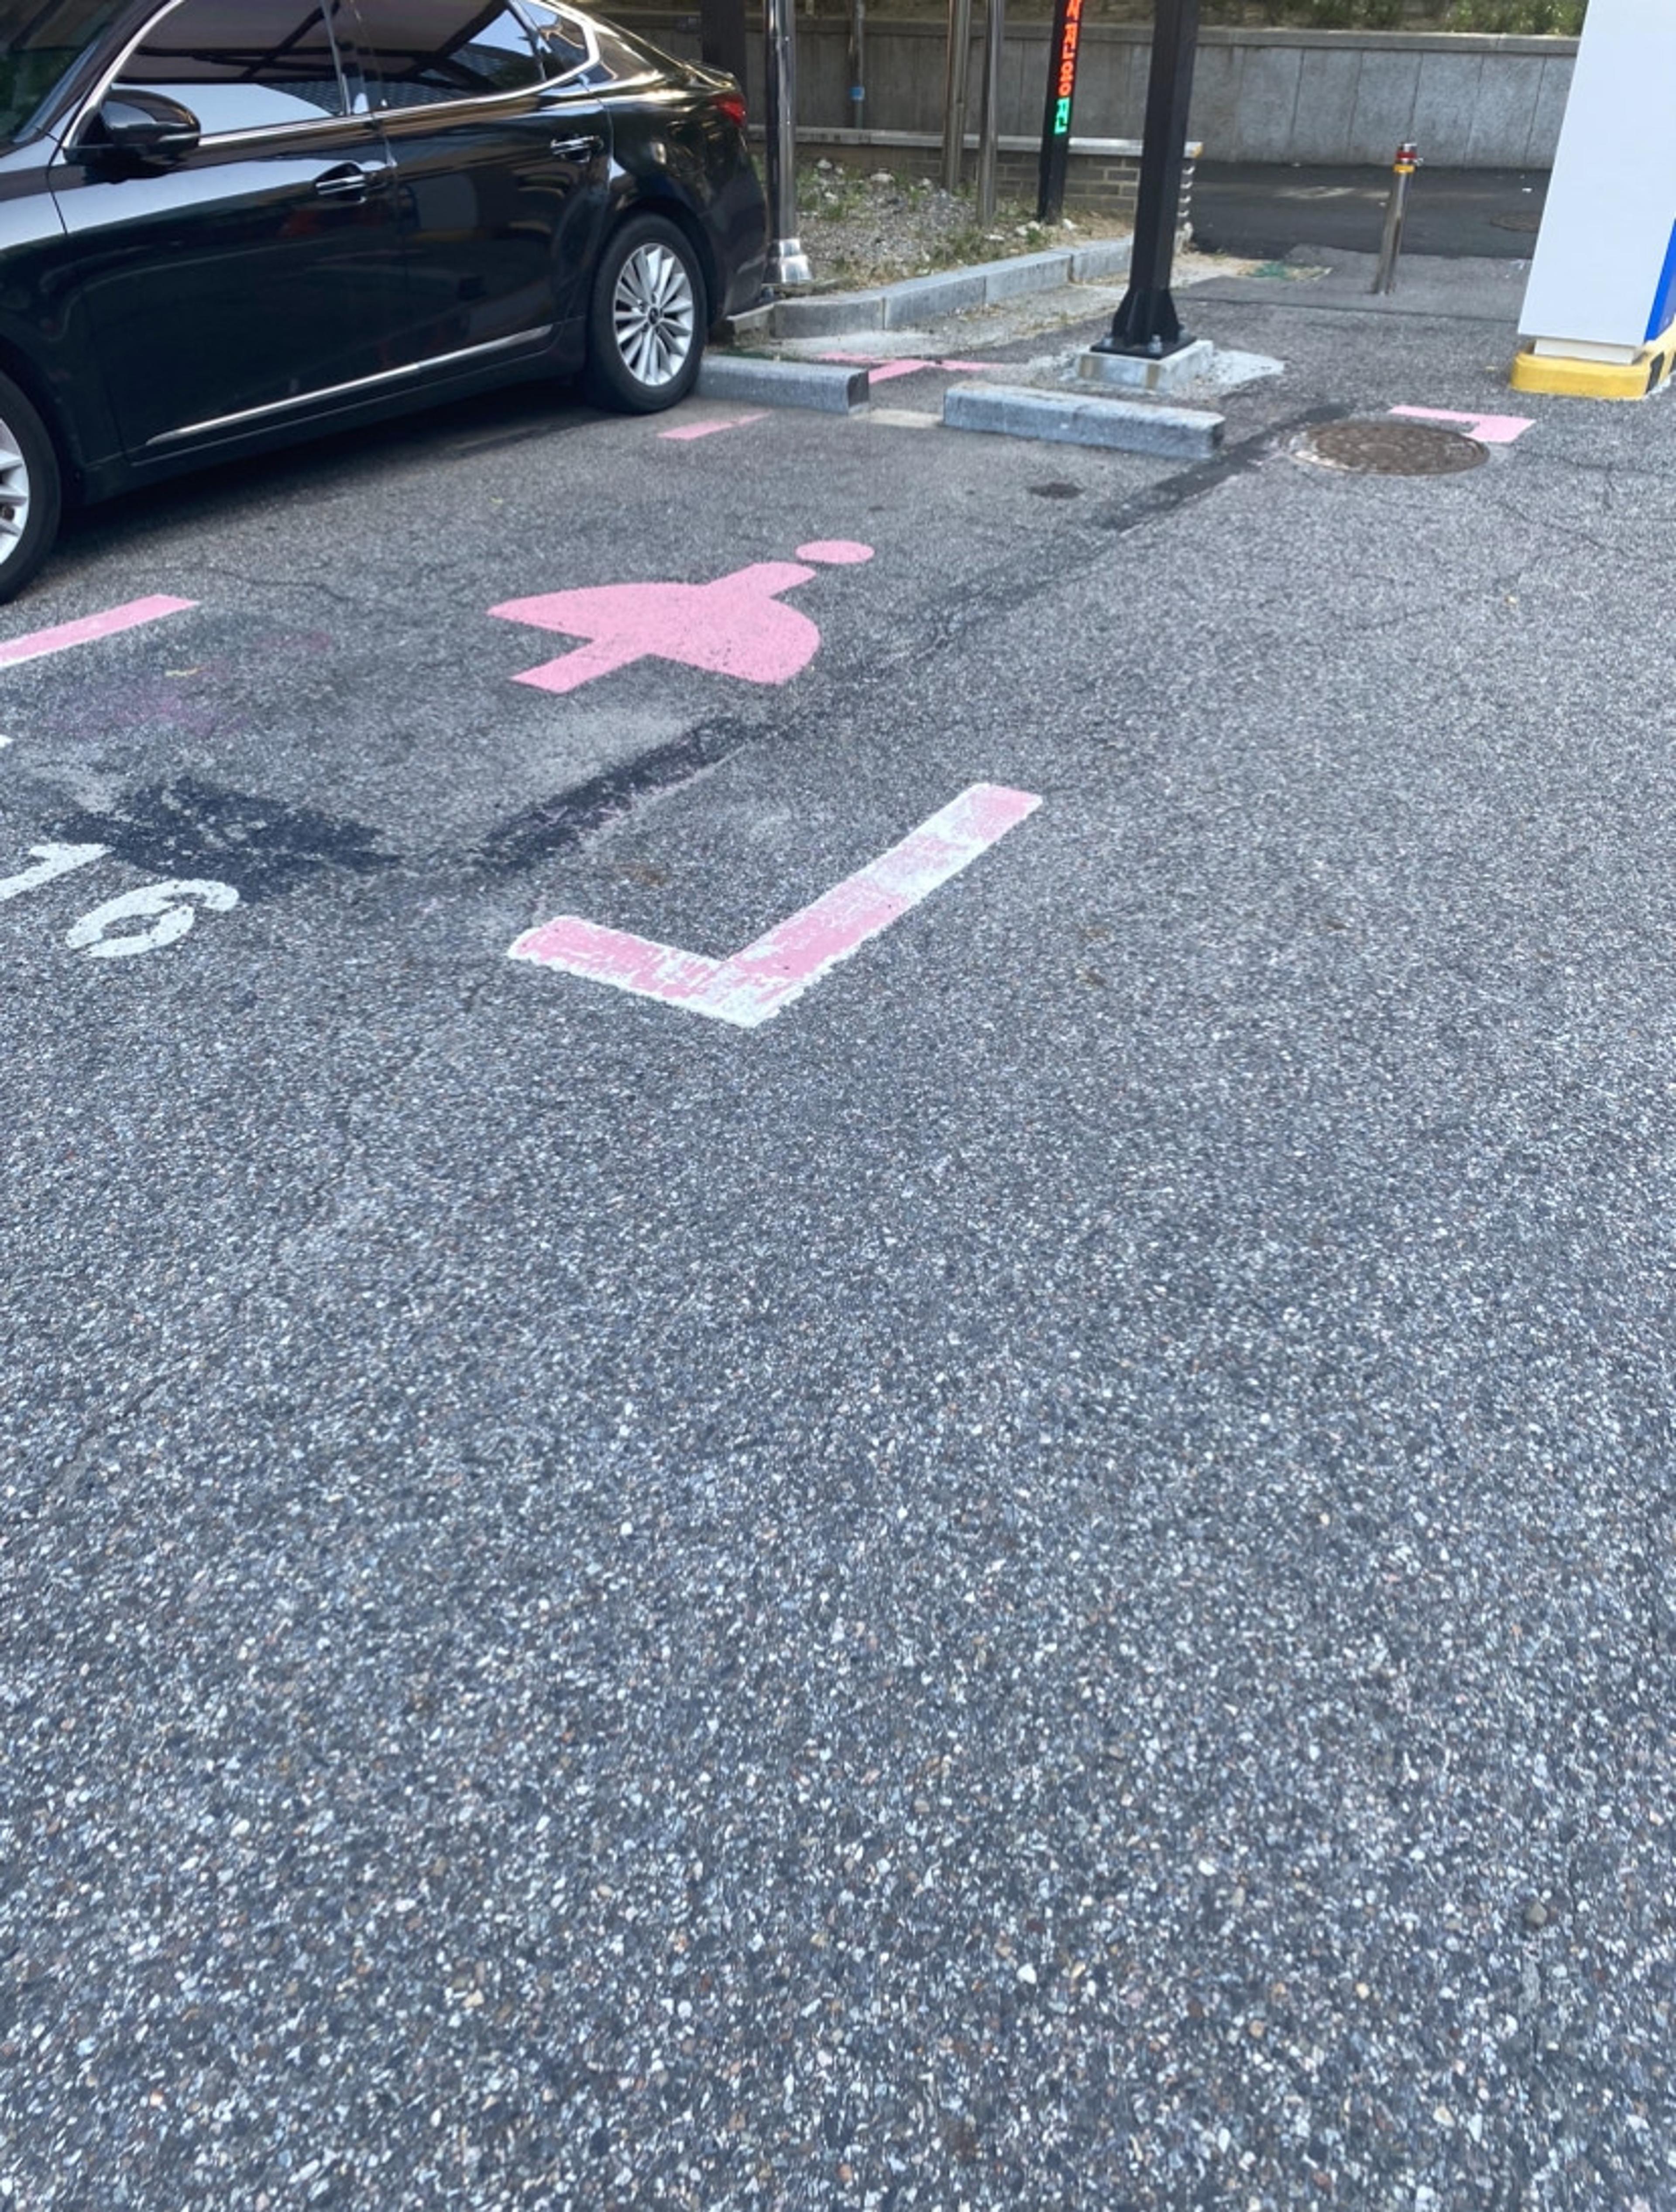 Parking space reserved for women drivers in Seoul